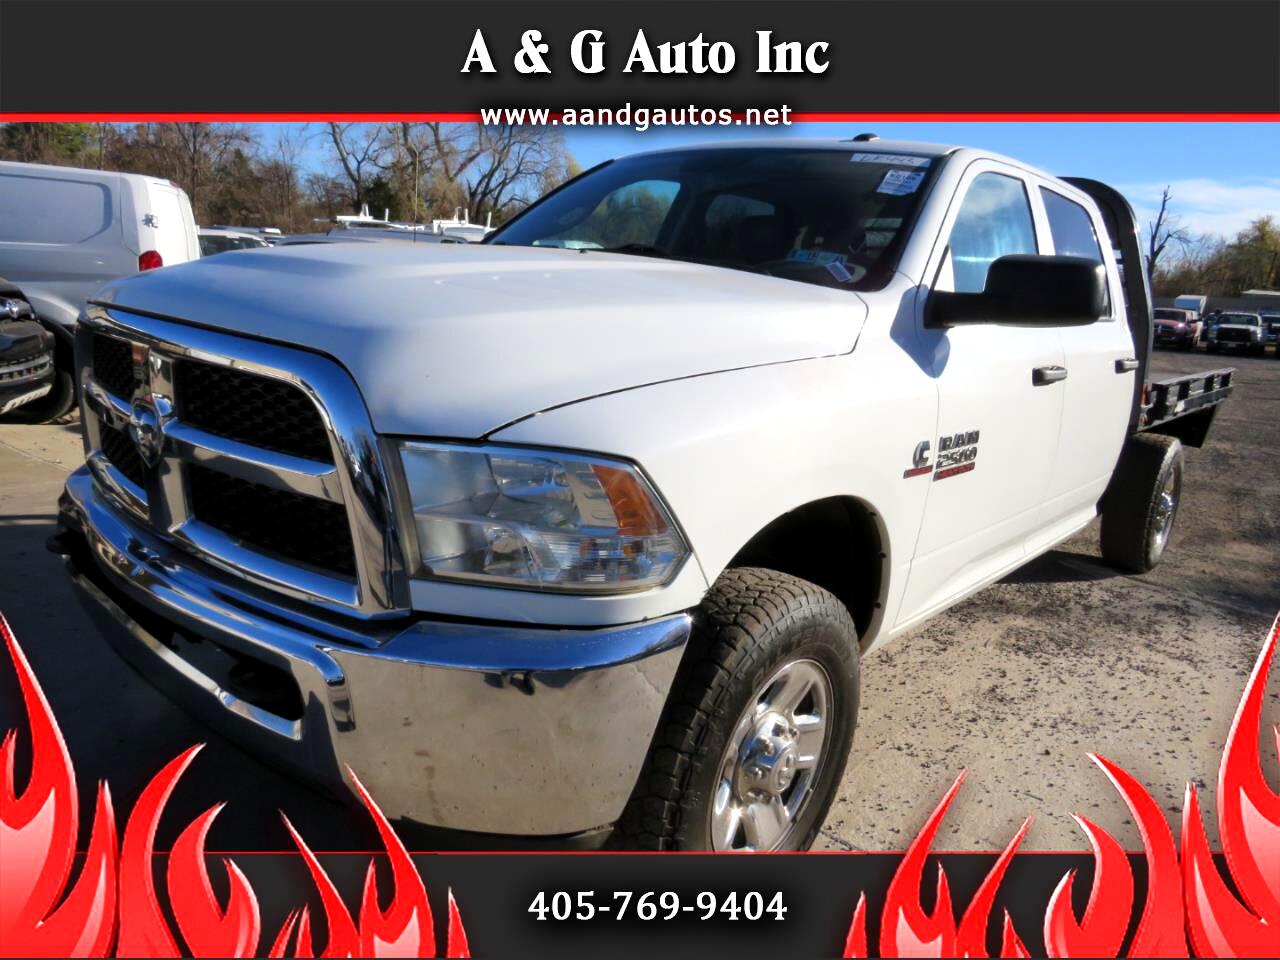 2017 Dodge Ram 2500 for sale in Oklahoma City OK 73141 by A & G Auto Inc